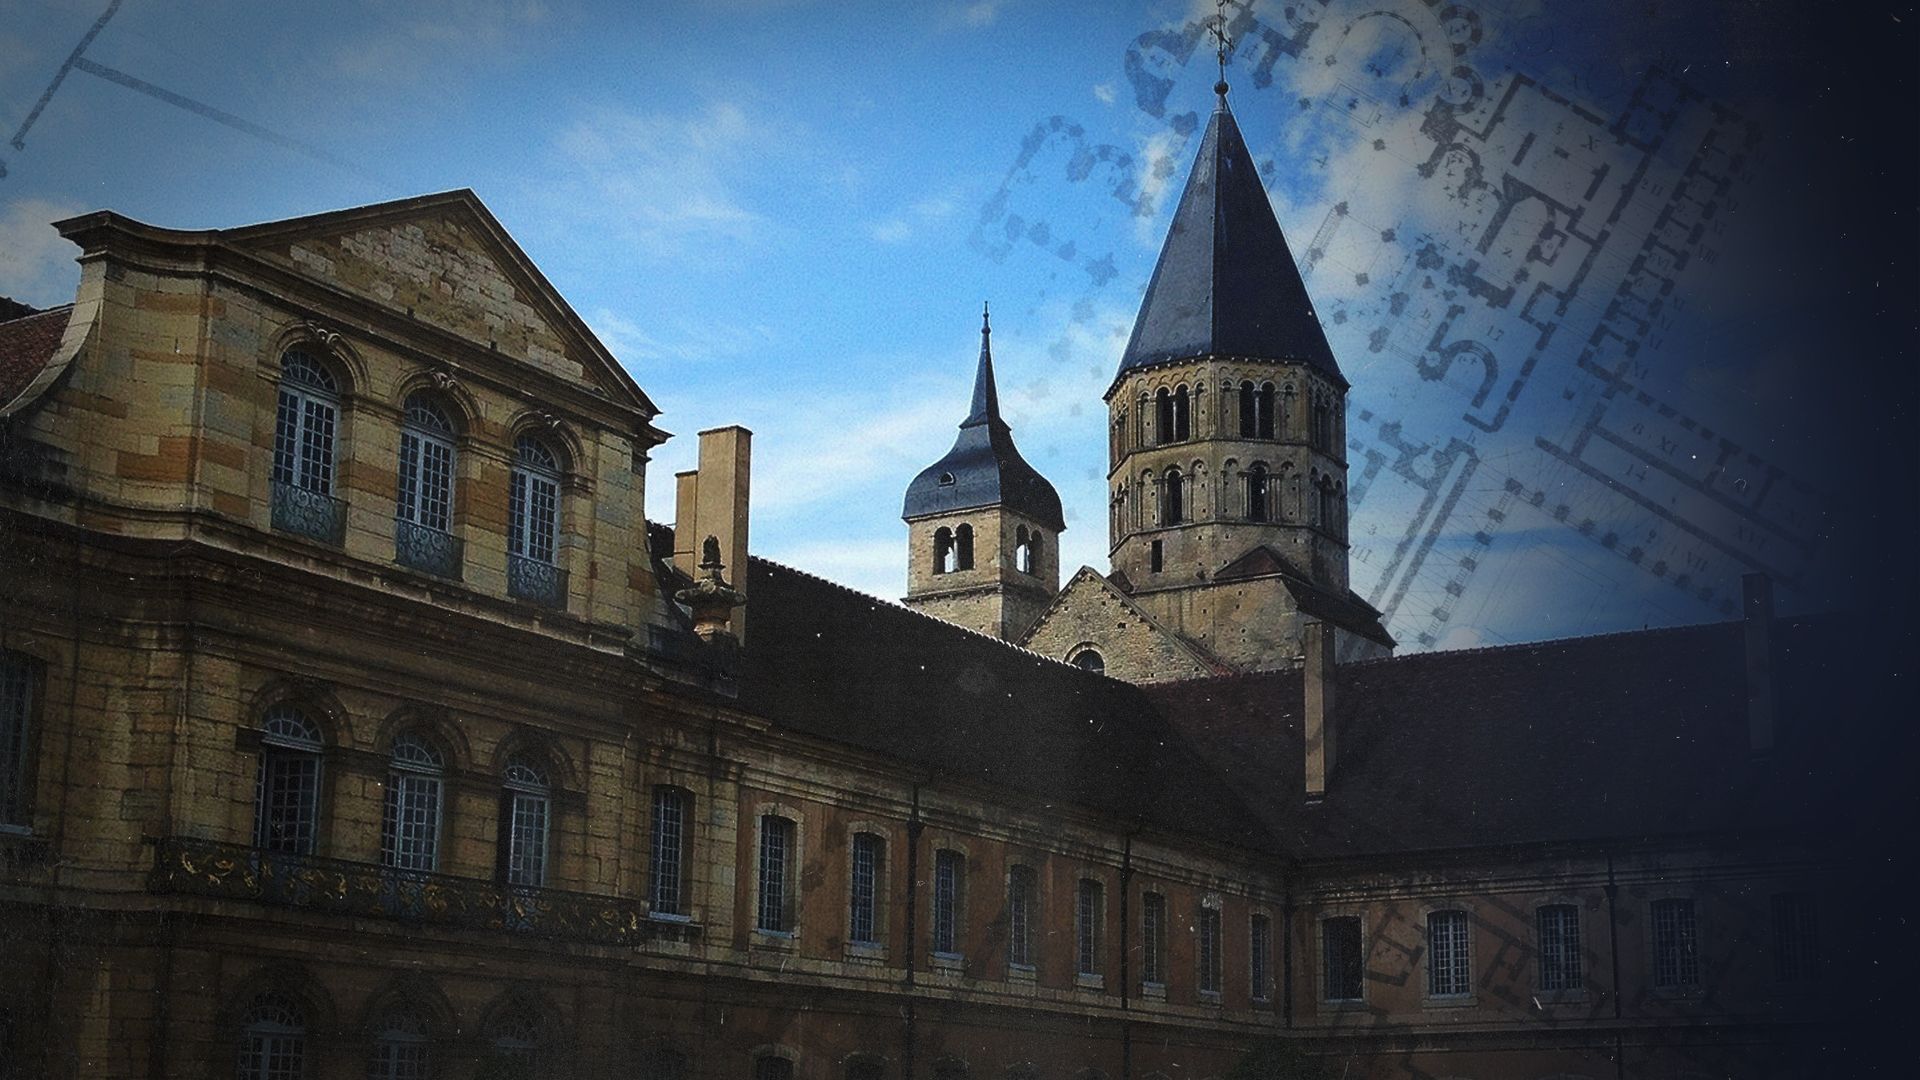 Cluny Abbey: The Lost Holy City